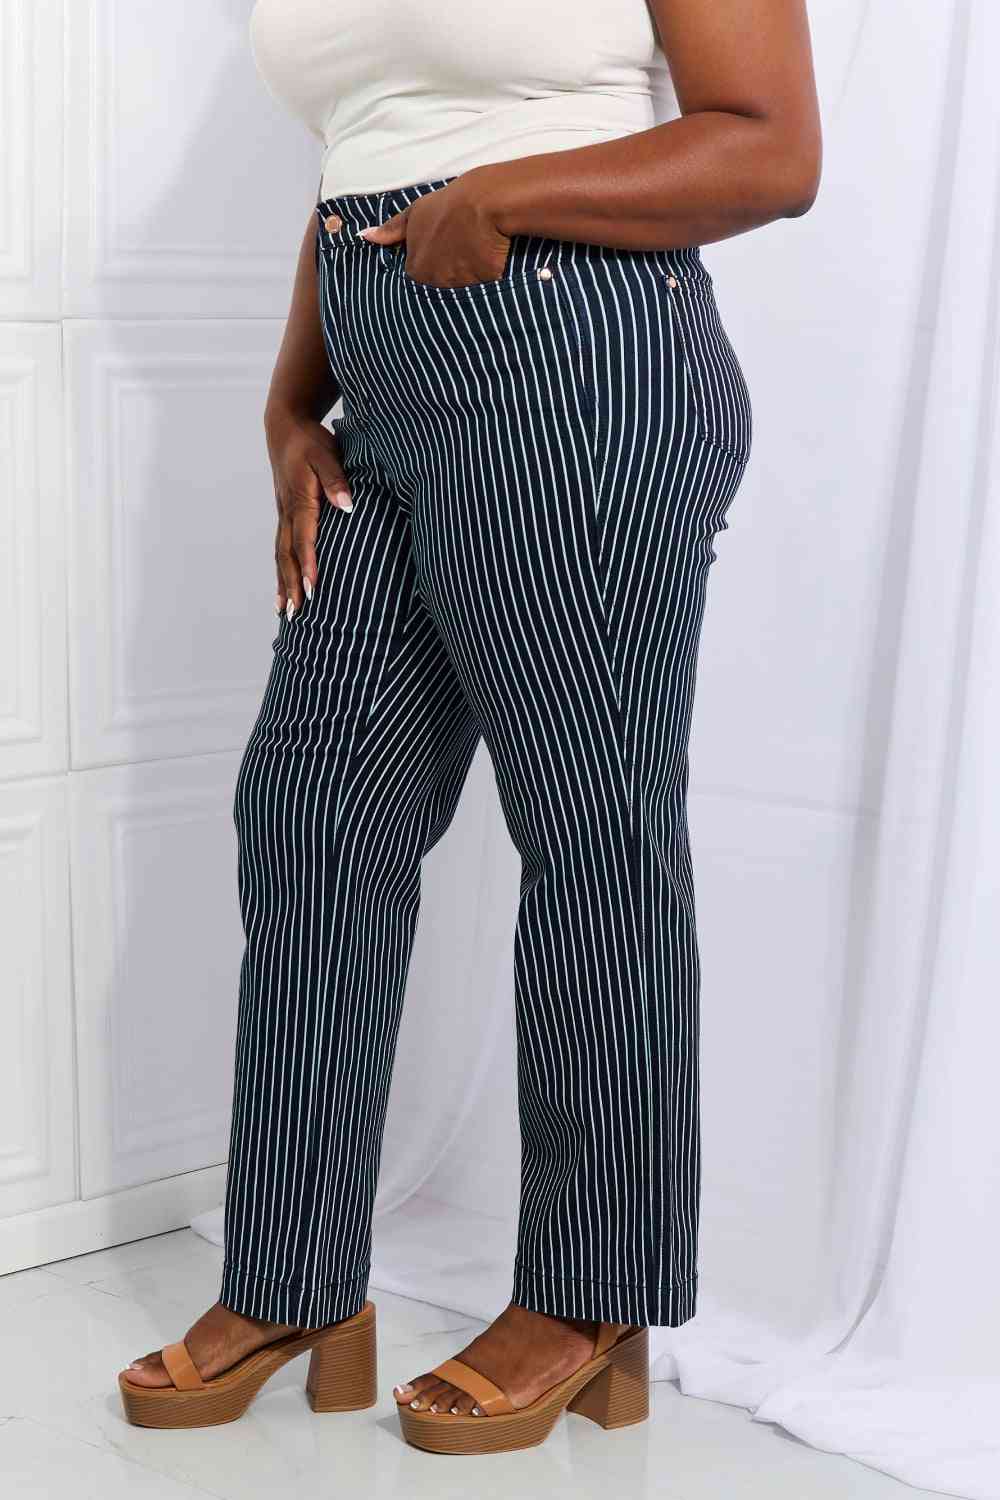 Judy Blue Cassidy Full Size High Waisted Tummy Control Striped Straight Jeans - Alonna's Legging Land